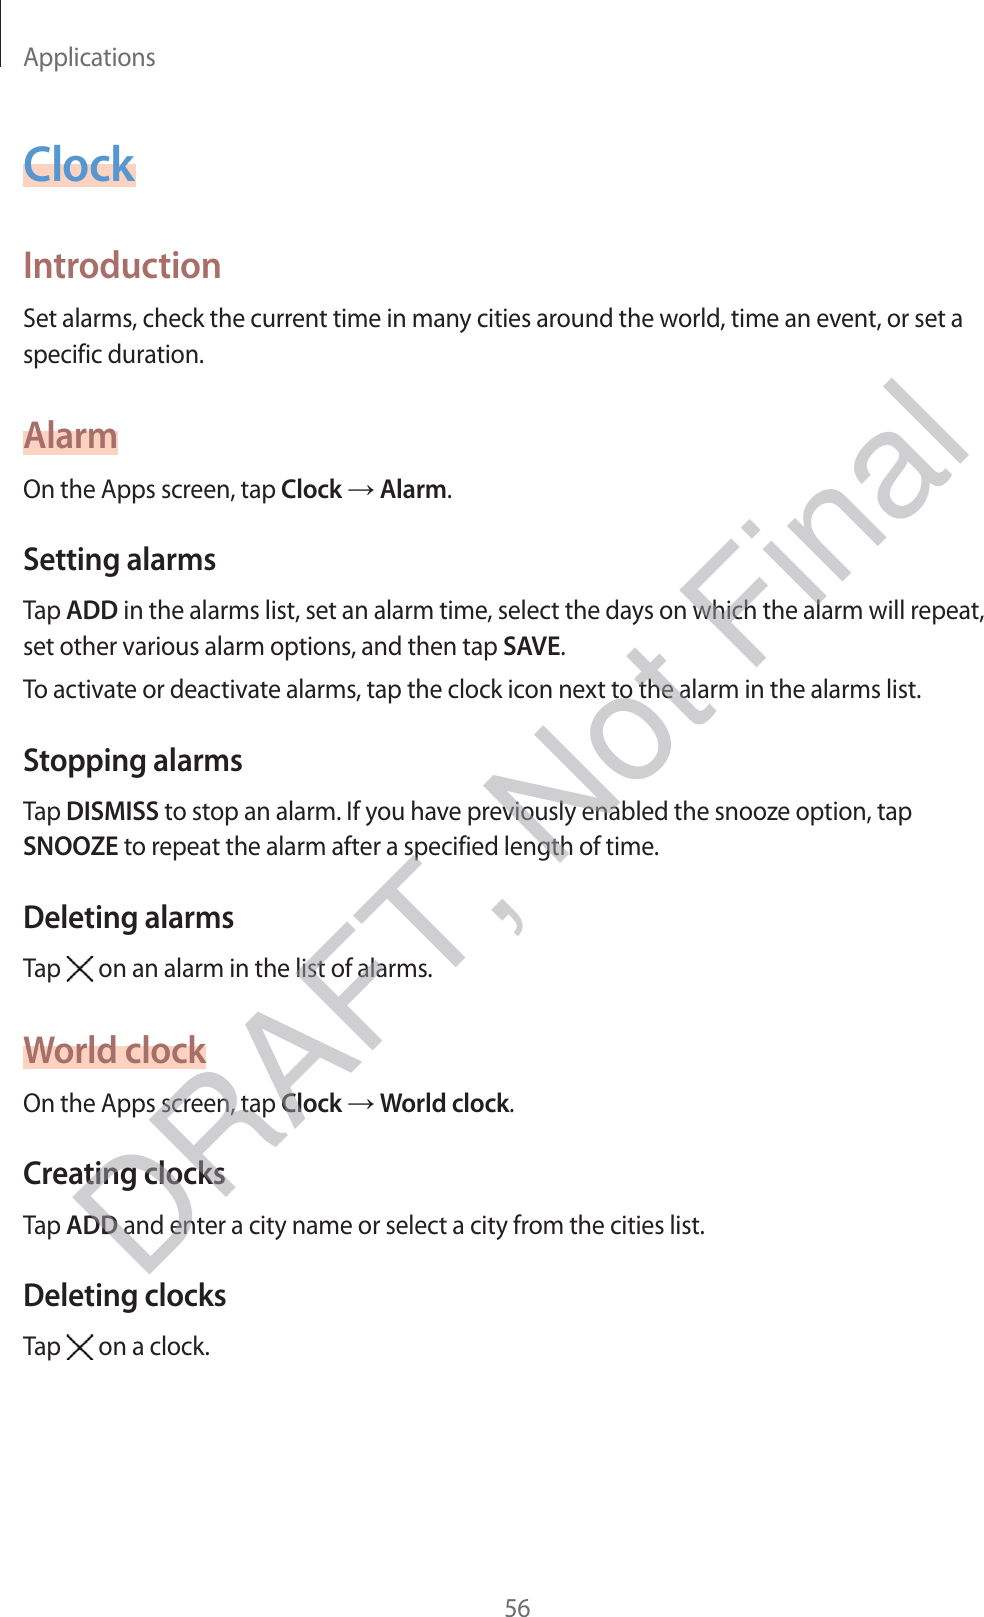 Applications56ClockIntroductionSet alarms, check the current time in many cities around the world, time an event, or set a specific duration.AlarmOn the Apps screen, tap Clock → Alarm.Setting alarmsTap ADD in the alarms list, set an alarm time, select the days on which the alarm will repeat, set other various alarm options, and then tap SAVE.To activate or deactivate alarms, tap the clock icon next to the alarm in the alarms list.Stopping alarmsTap DISMISS to stop an alarm. If you have previously enabled the snooze option, tap SNOOZE to repeat the alarm after a specified length of time.Deleting alarmsTap   on an alarm in the list of alarms.World clockOn the Apps screen, tap Clock → World clock.Creating clocksTap ADD and enter a city name or select a city from the cities list.Deleting clocksTap   on a clock.DRAFT, Not Final